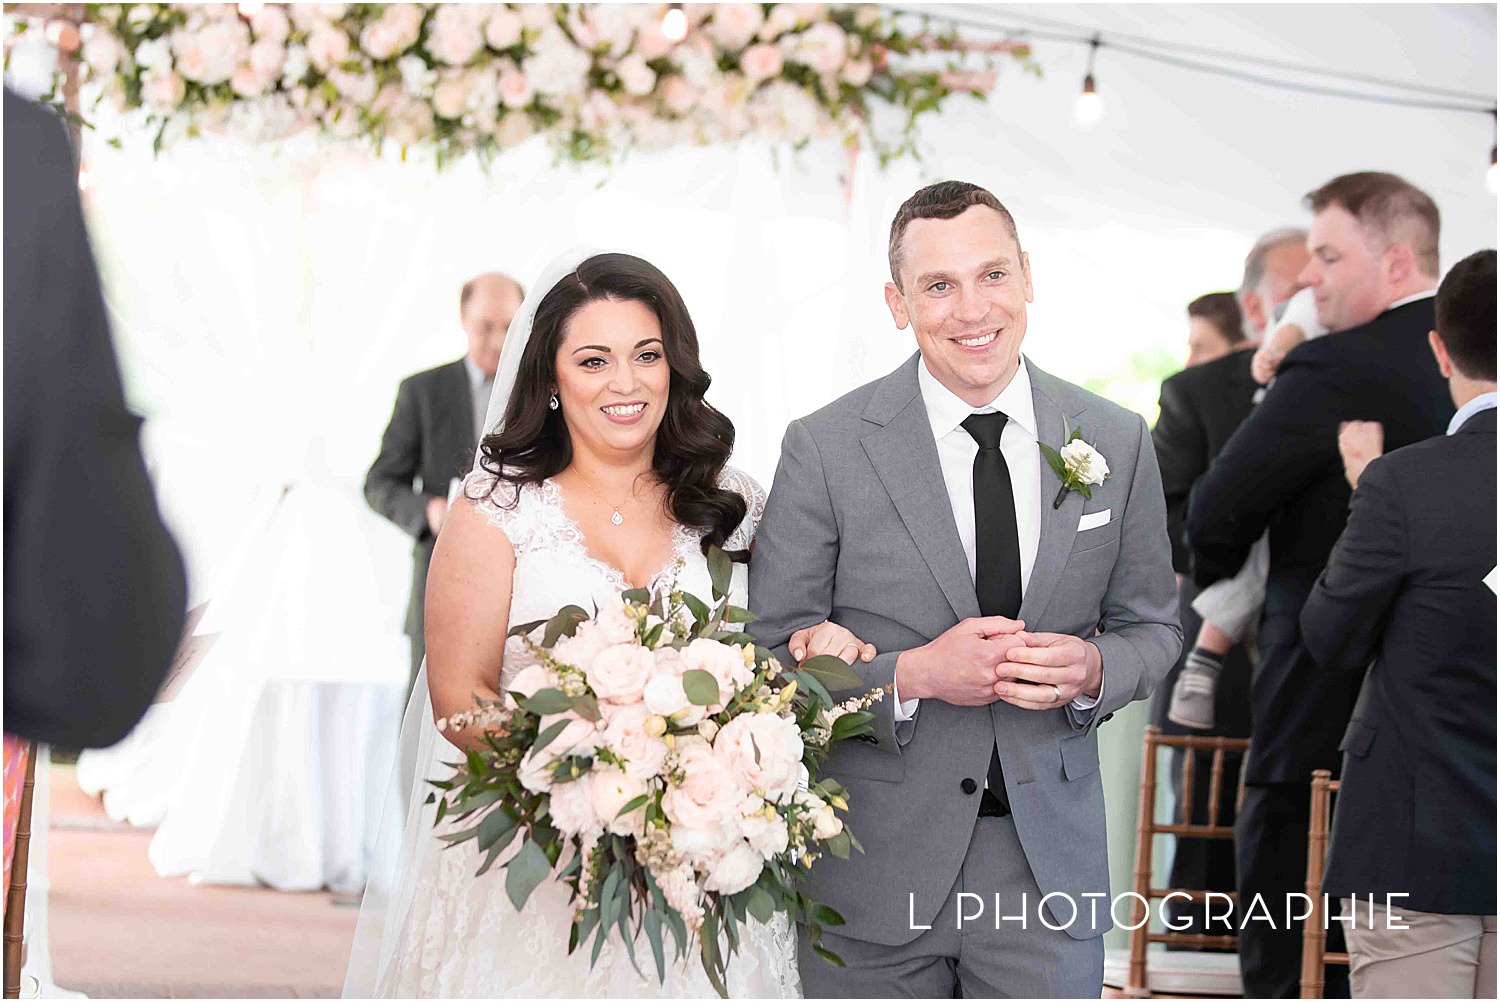 L Photographie St. Louis wedding photography Westwood Country Club Cosmopolitan Events_0022.jpg